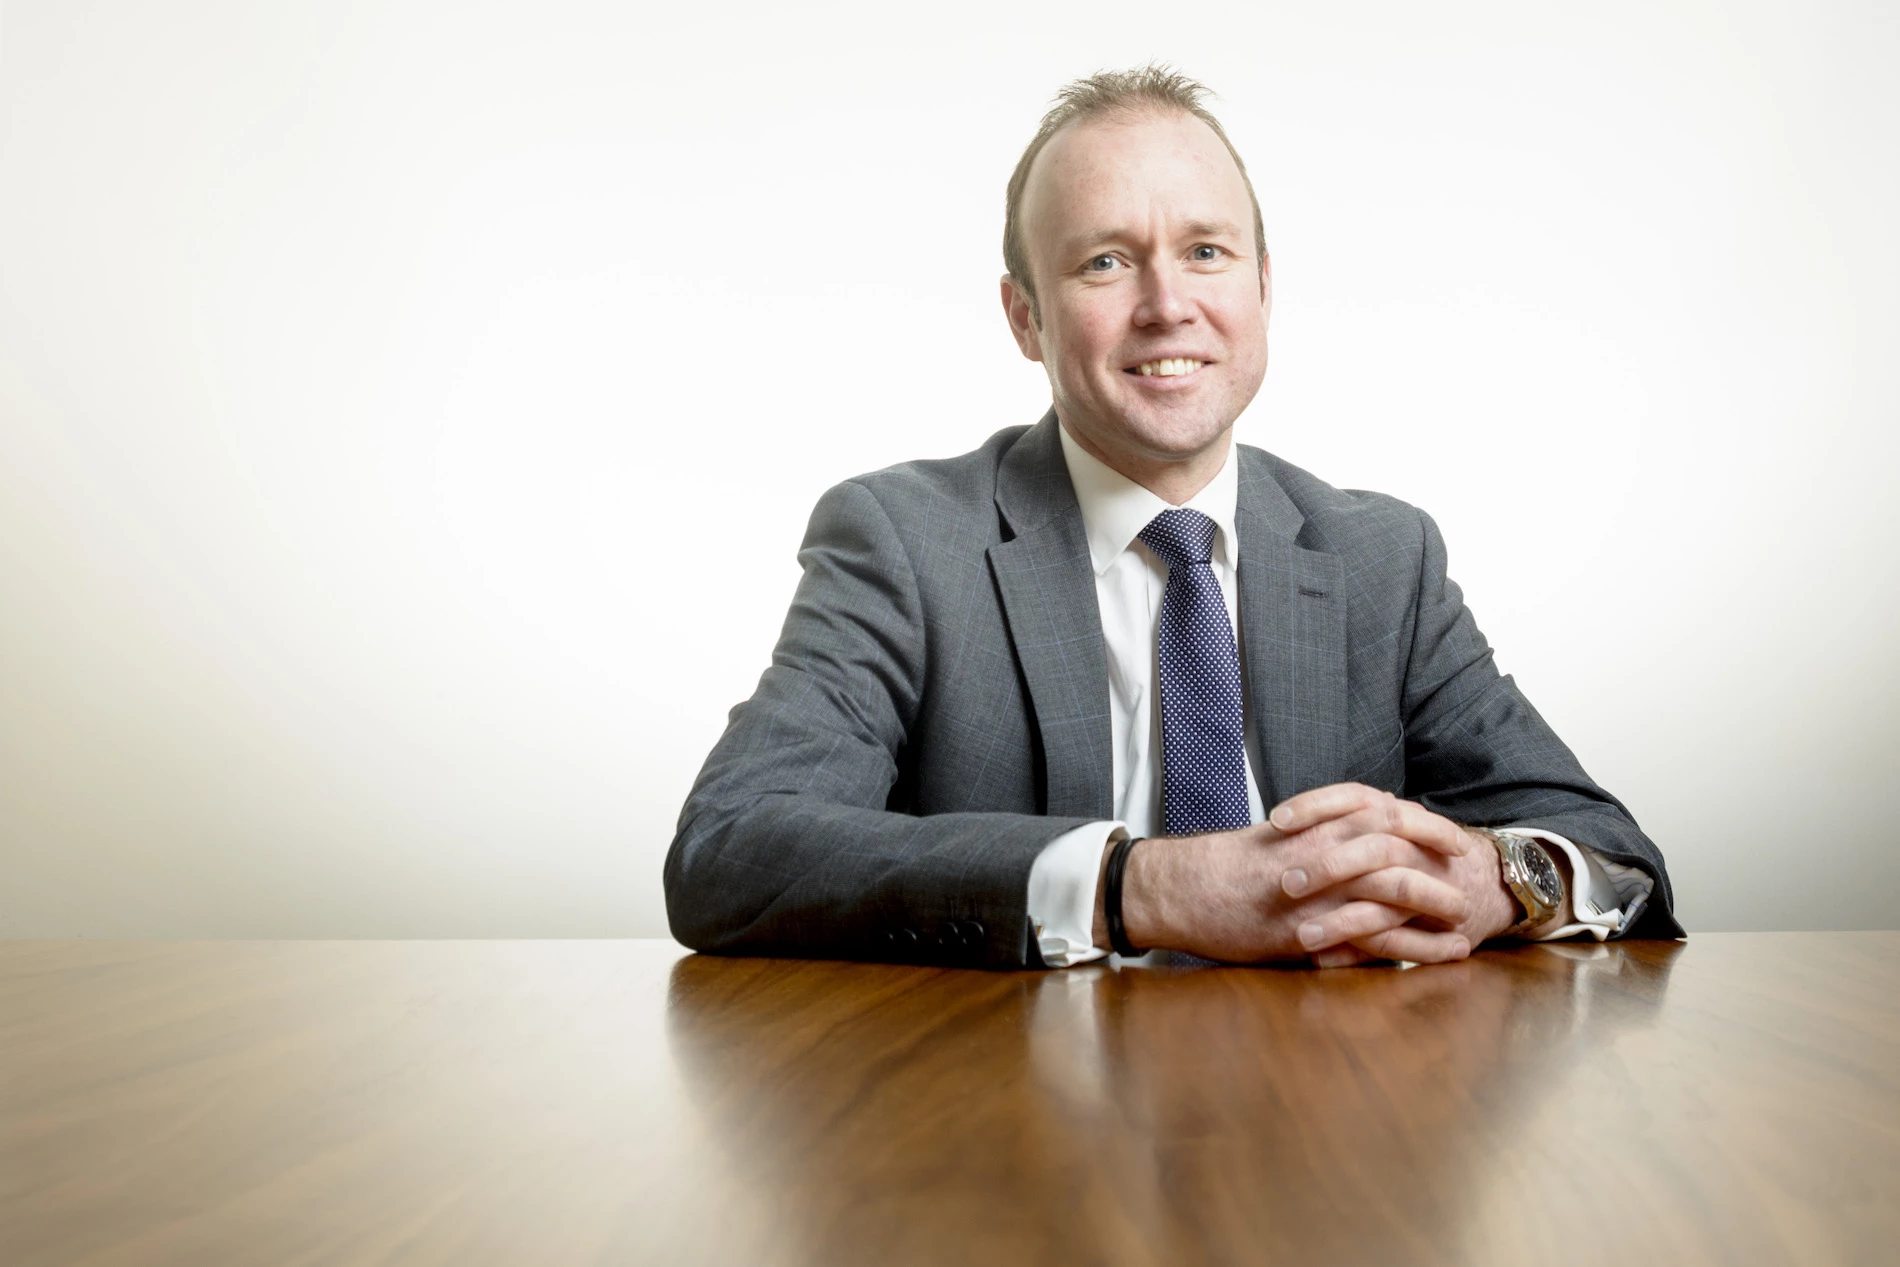 Stephen Harris, regional director for Yorkshire at Lloyds Bank Commercial Banking